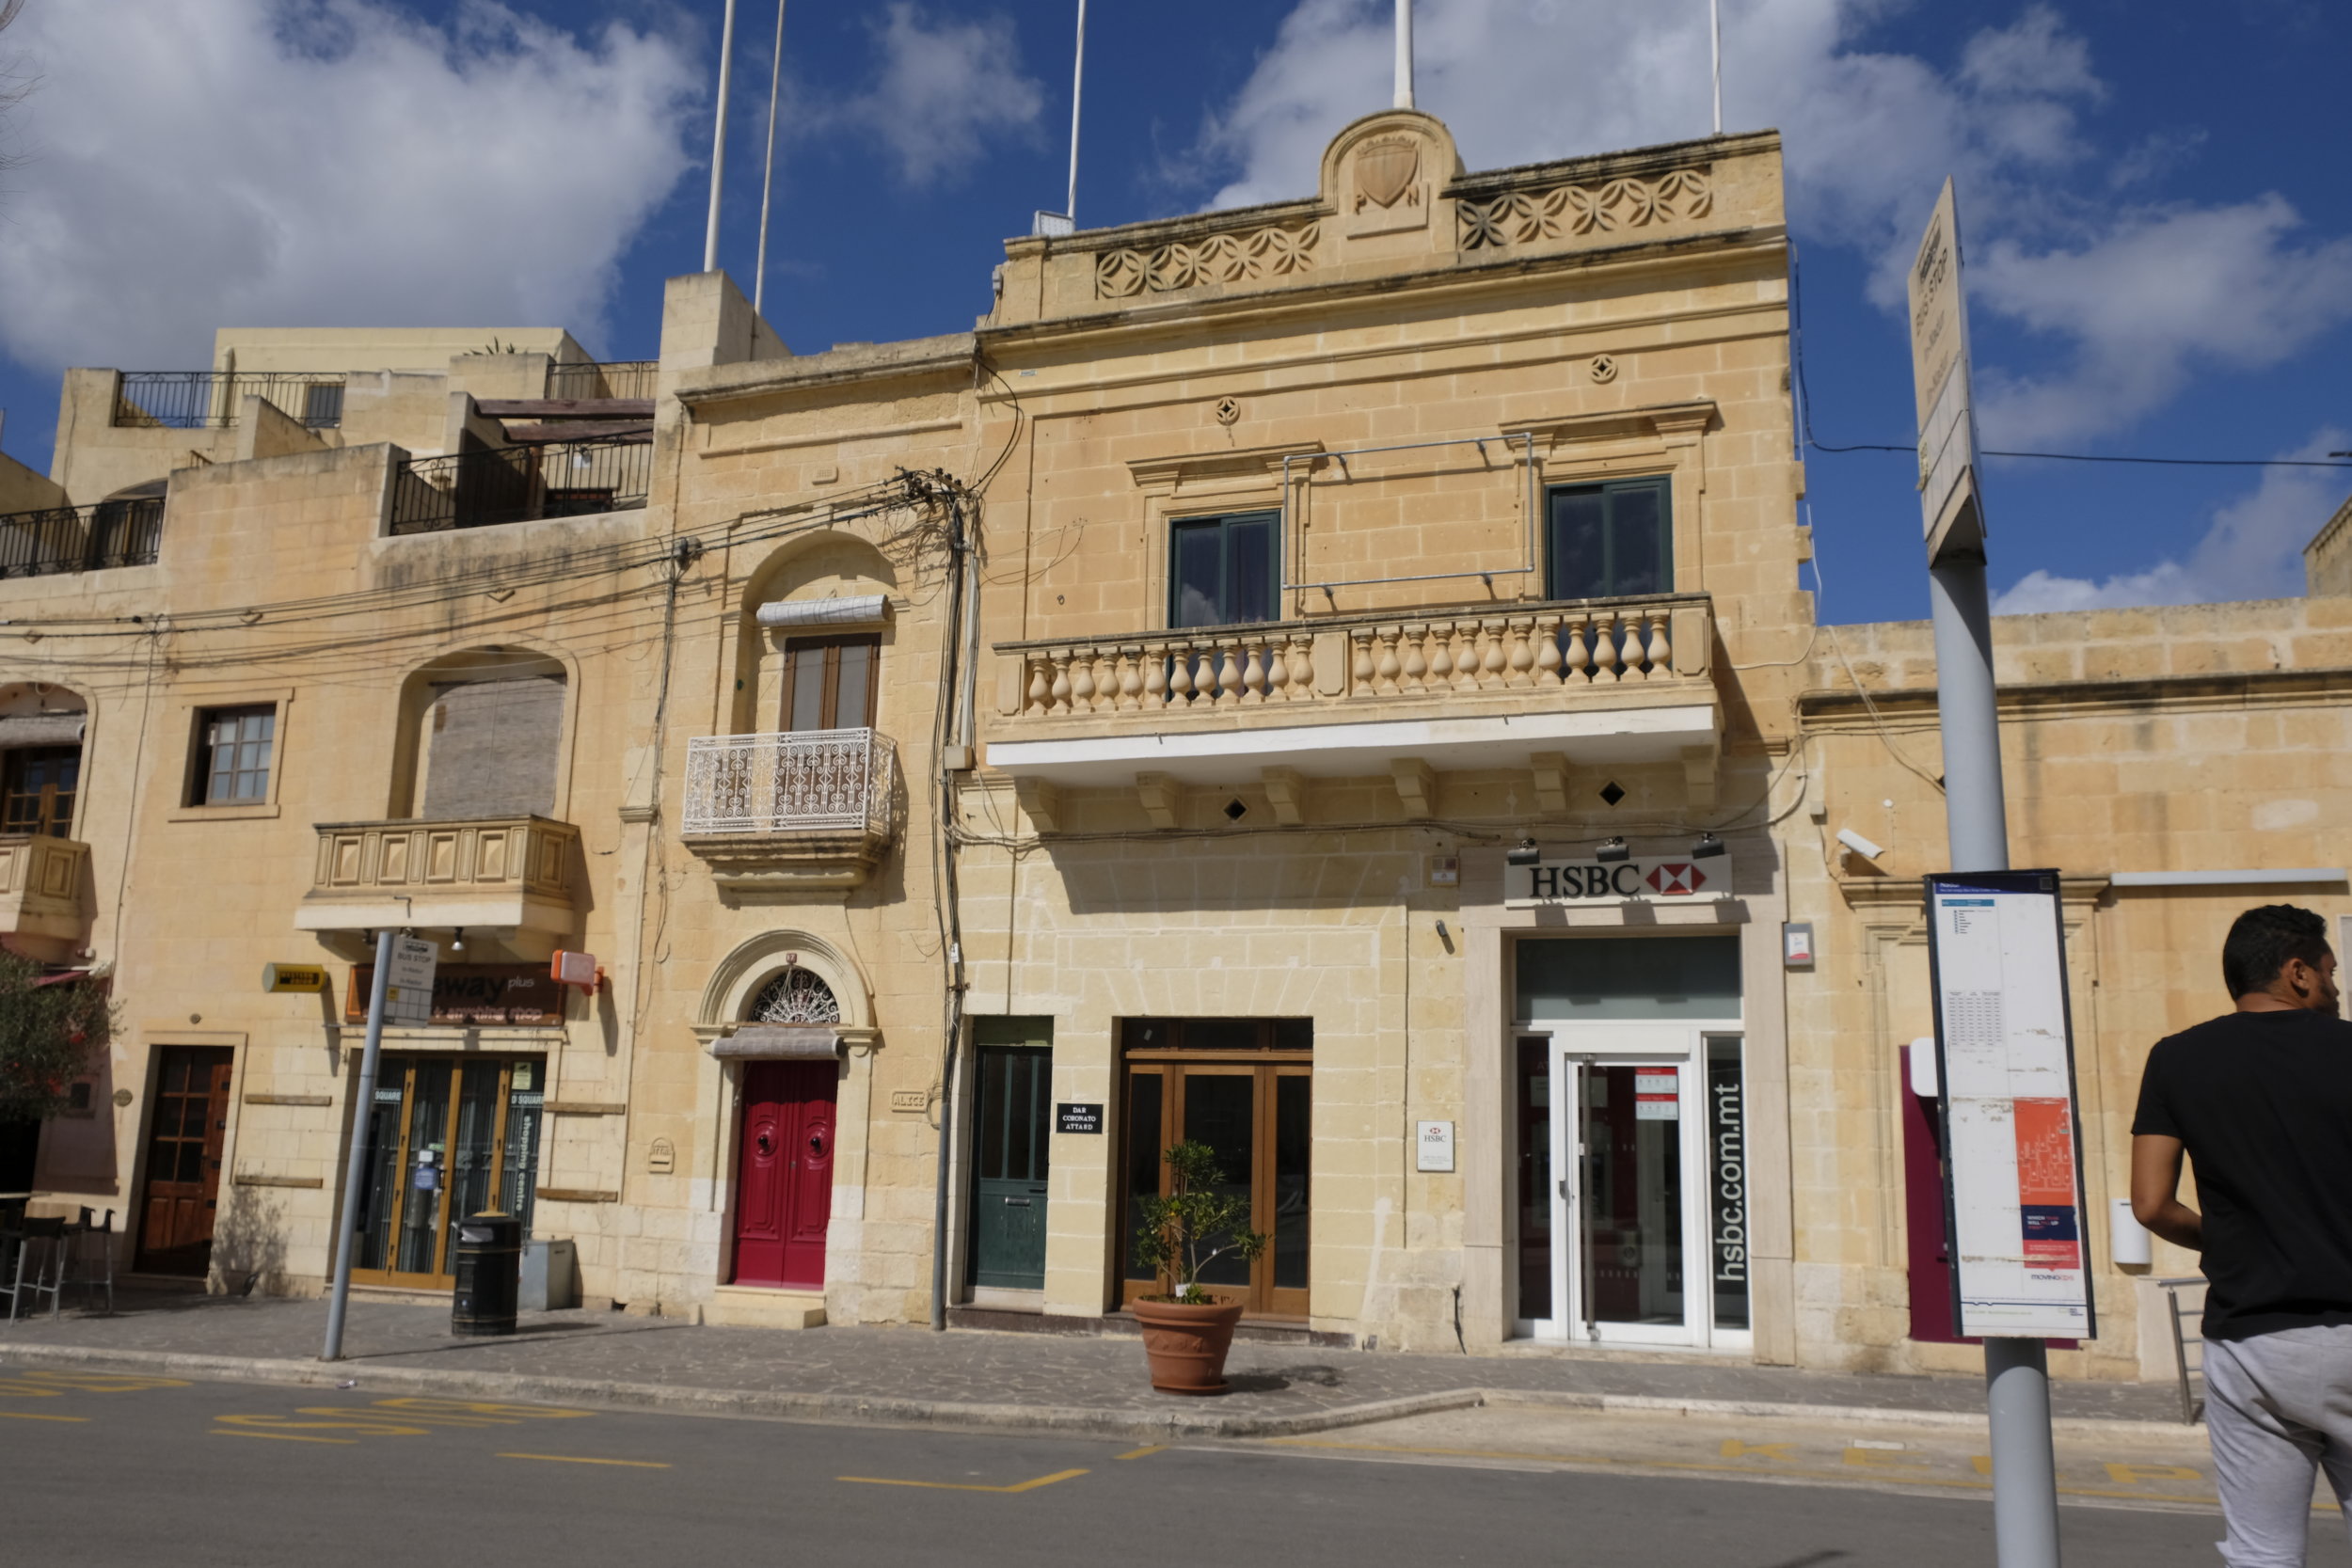 Traditional Gozo architecture, now also home to a bank